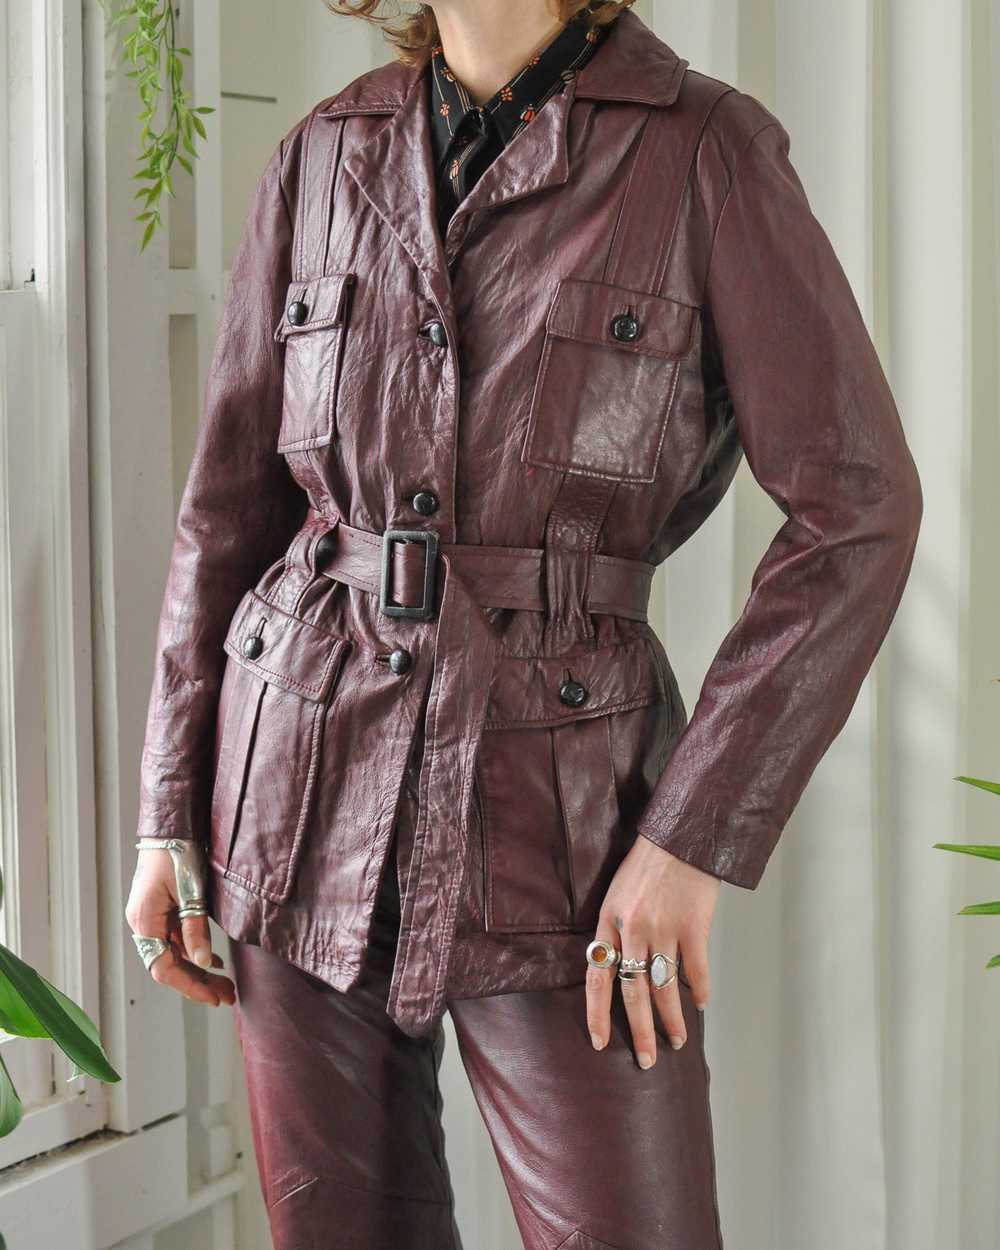 70s Burgundy Leather Pant Suit - image 3